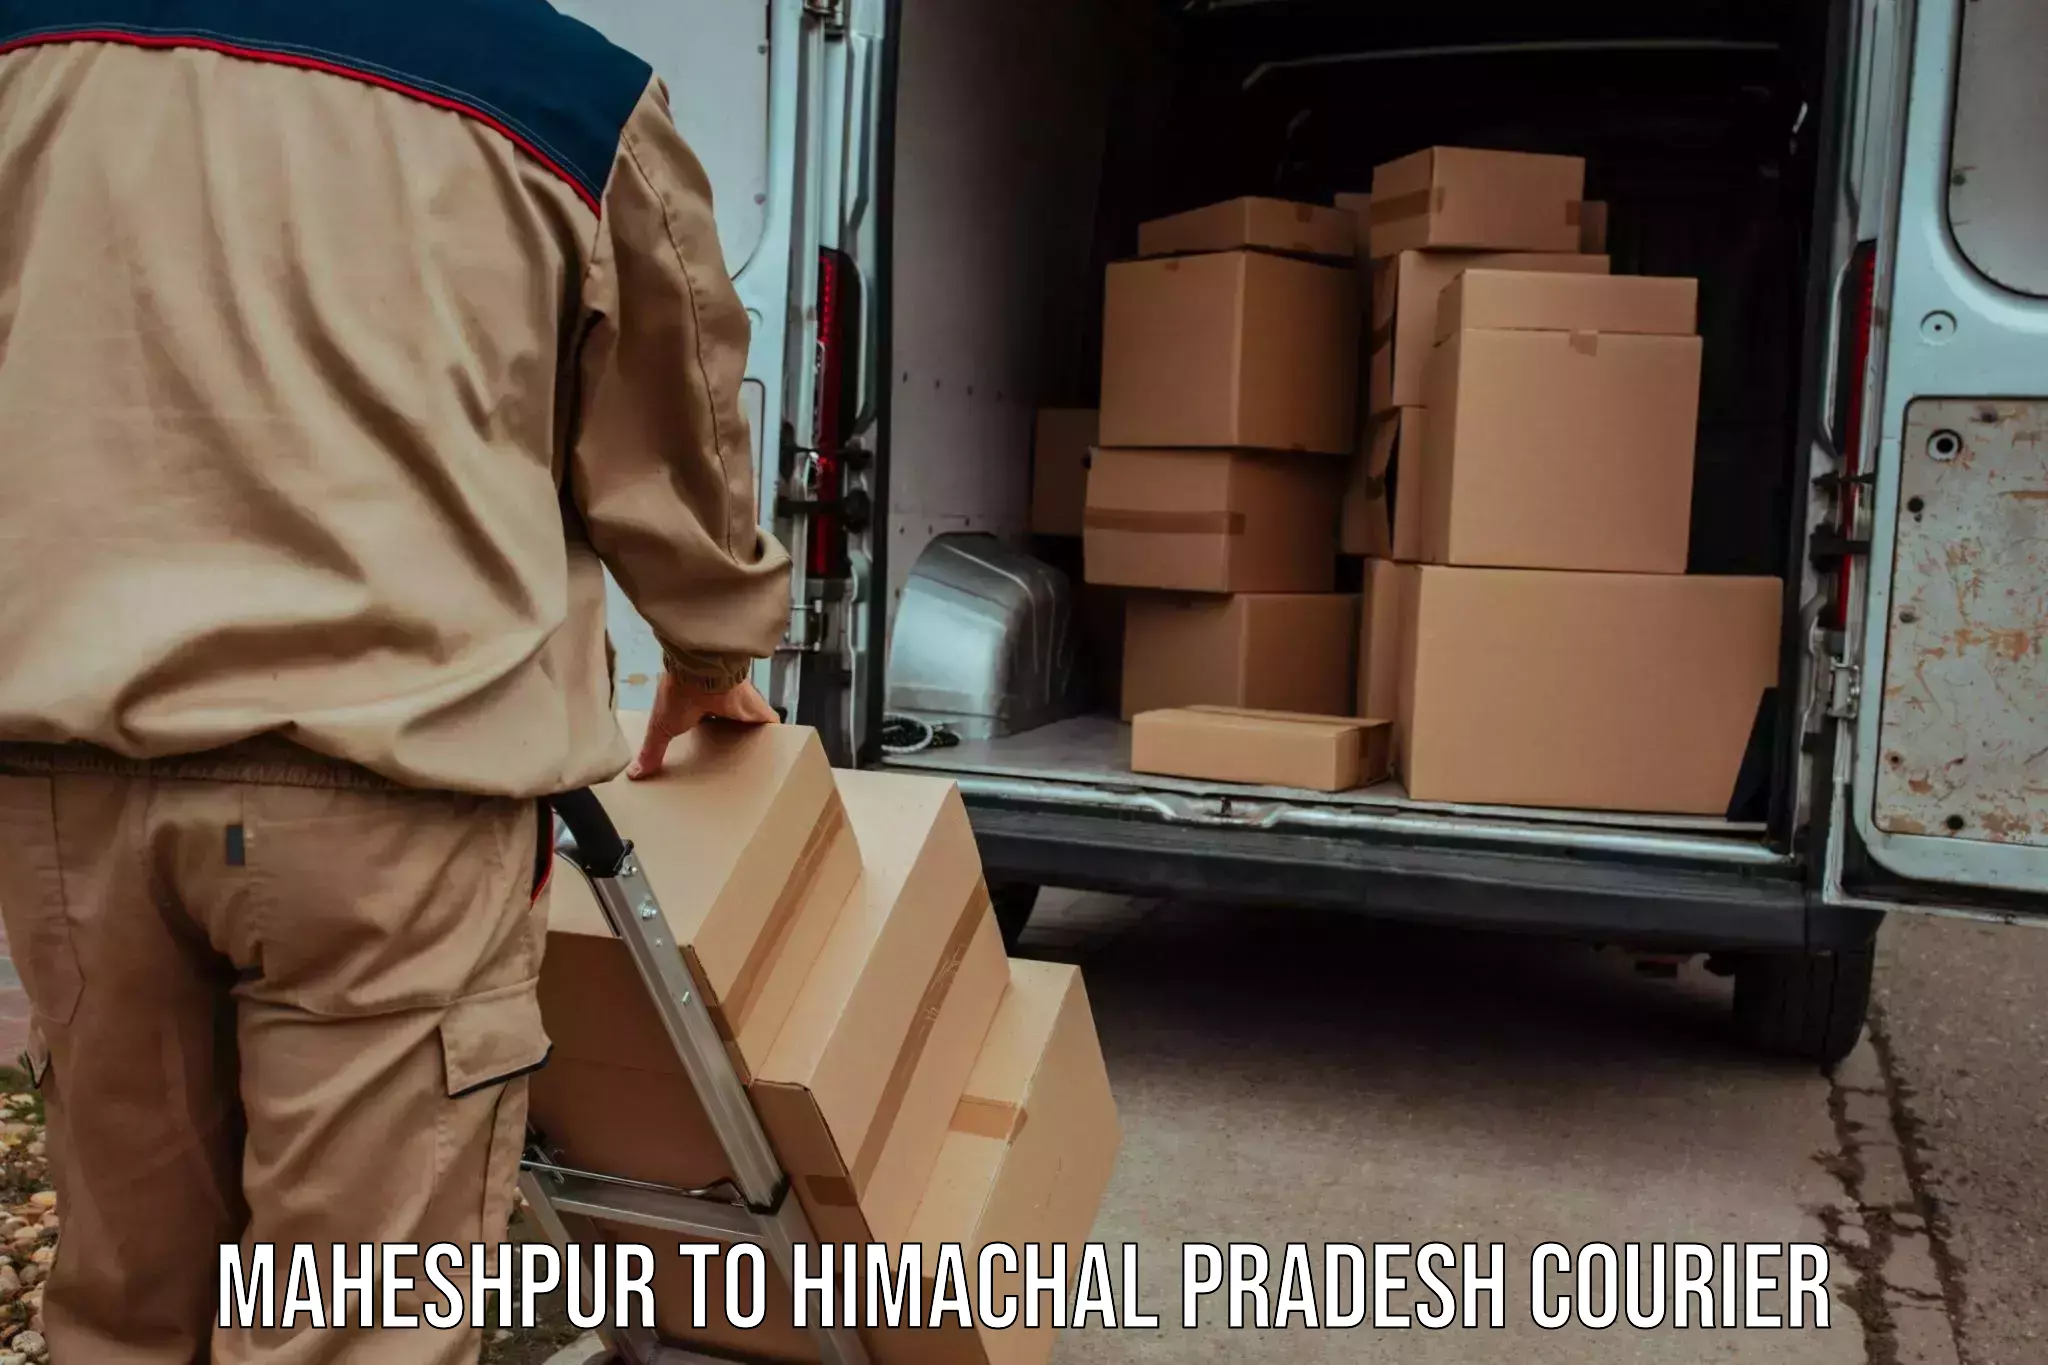 Reliable delivery network Maheshpur to IIT Mandi